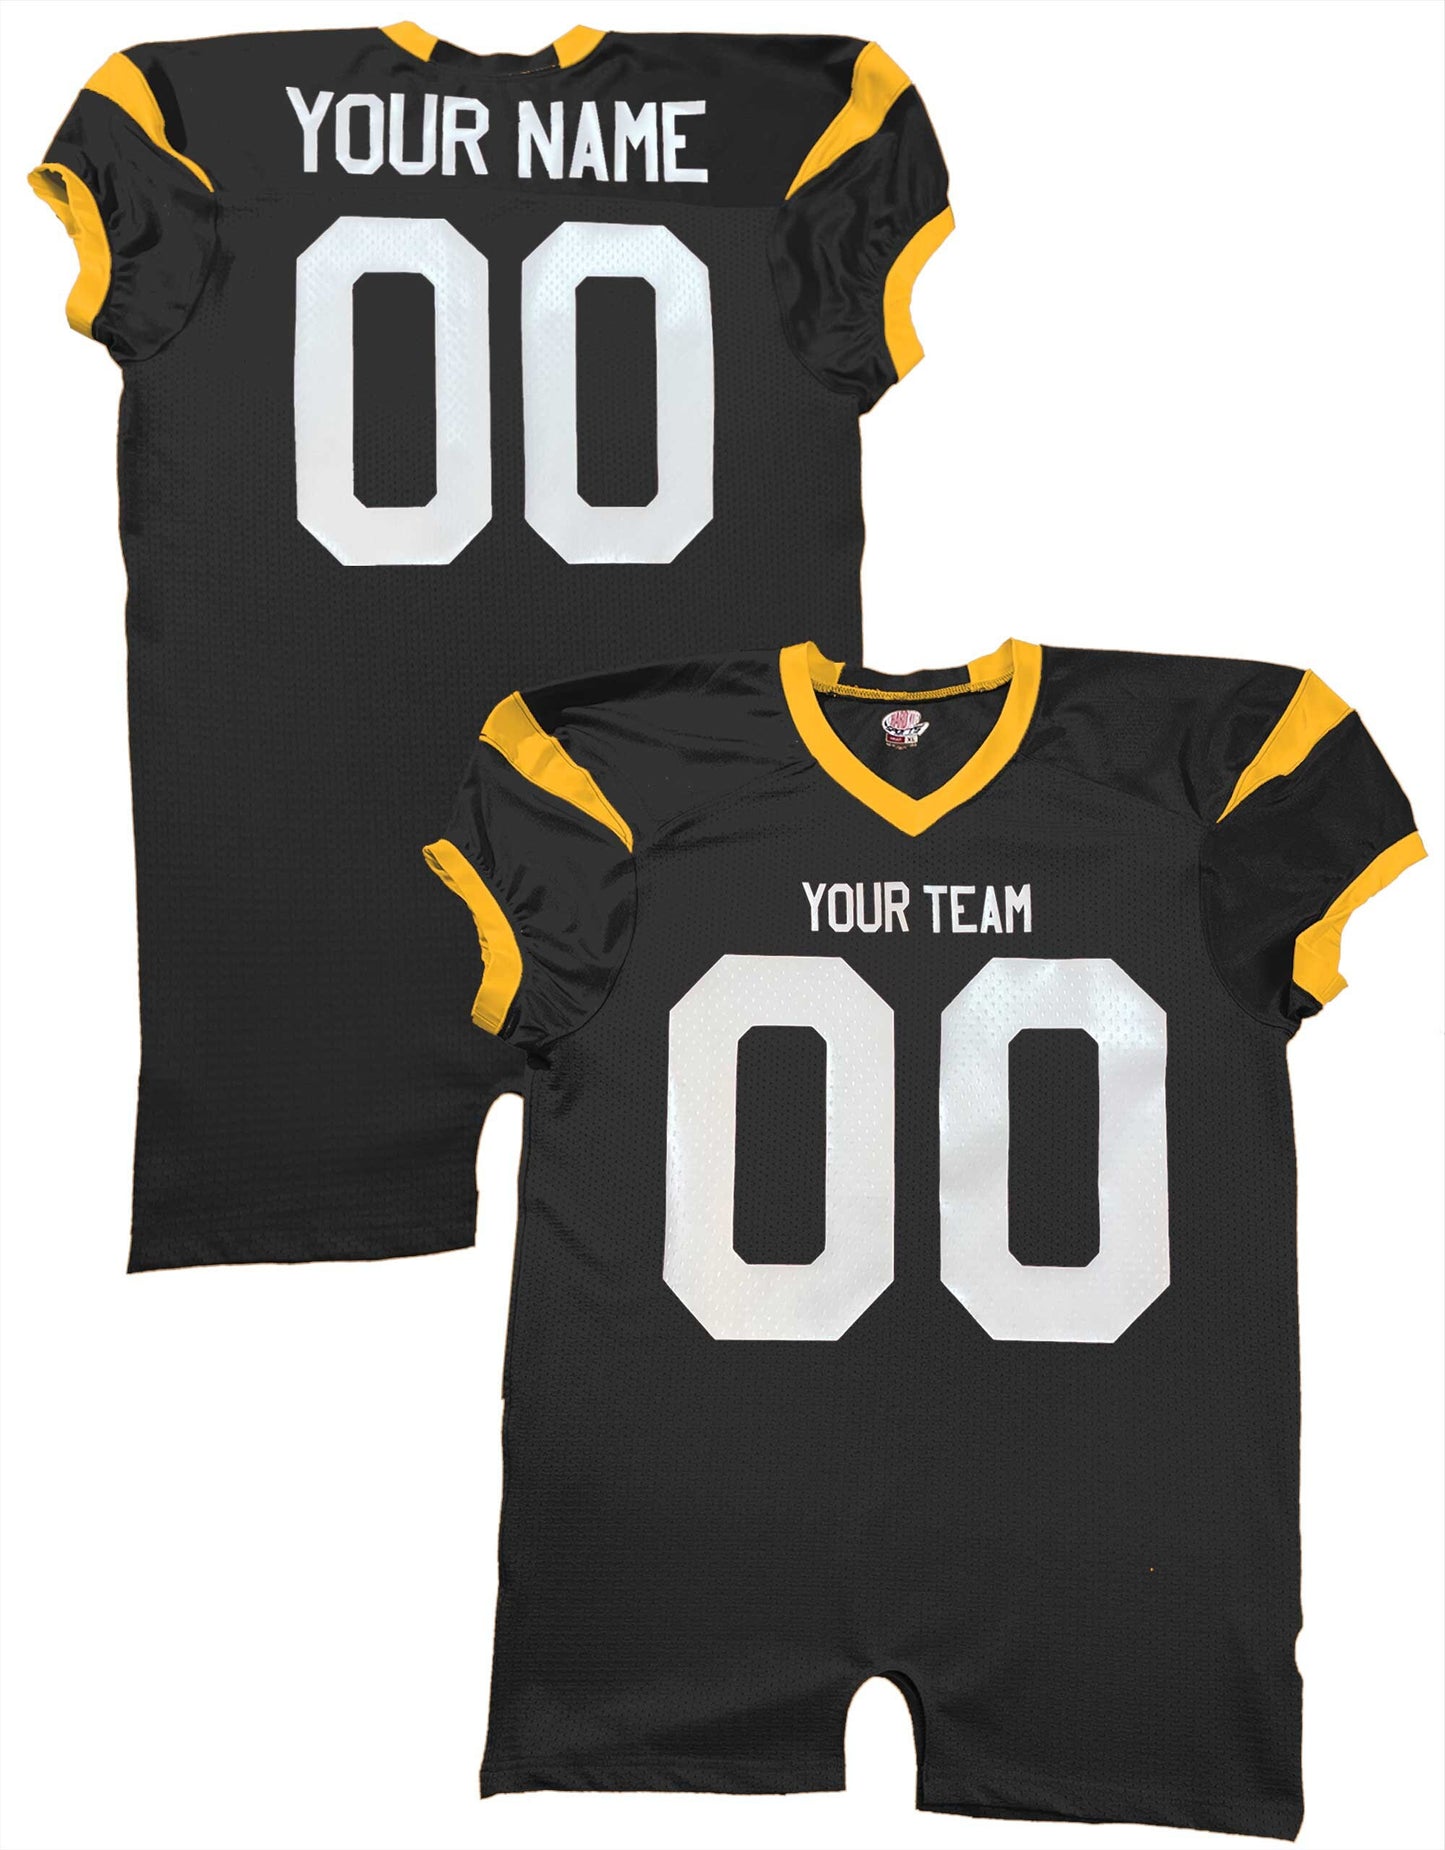 Team Professional Game Fitted Custom Football Jersey, Black, Navy, Gold, Stretch Mesh, Dazzle, Spandex, Team Name, Player Name and Numbers